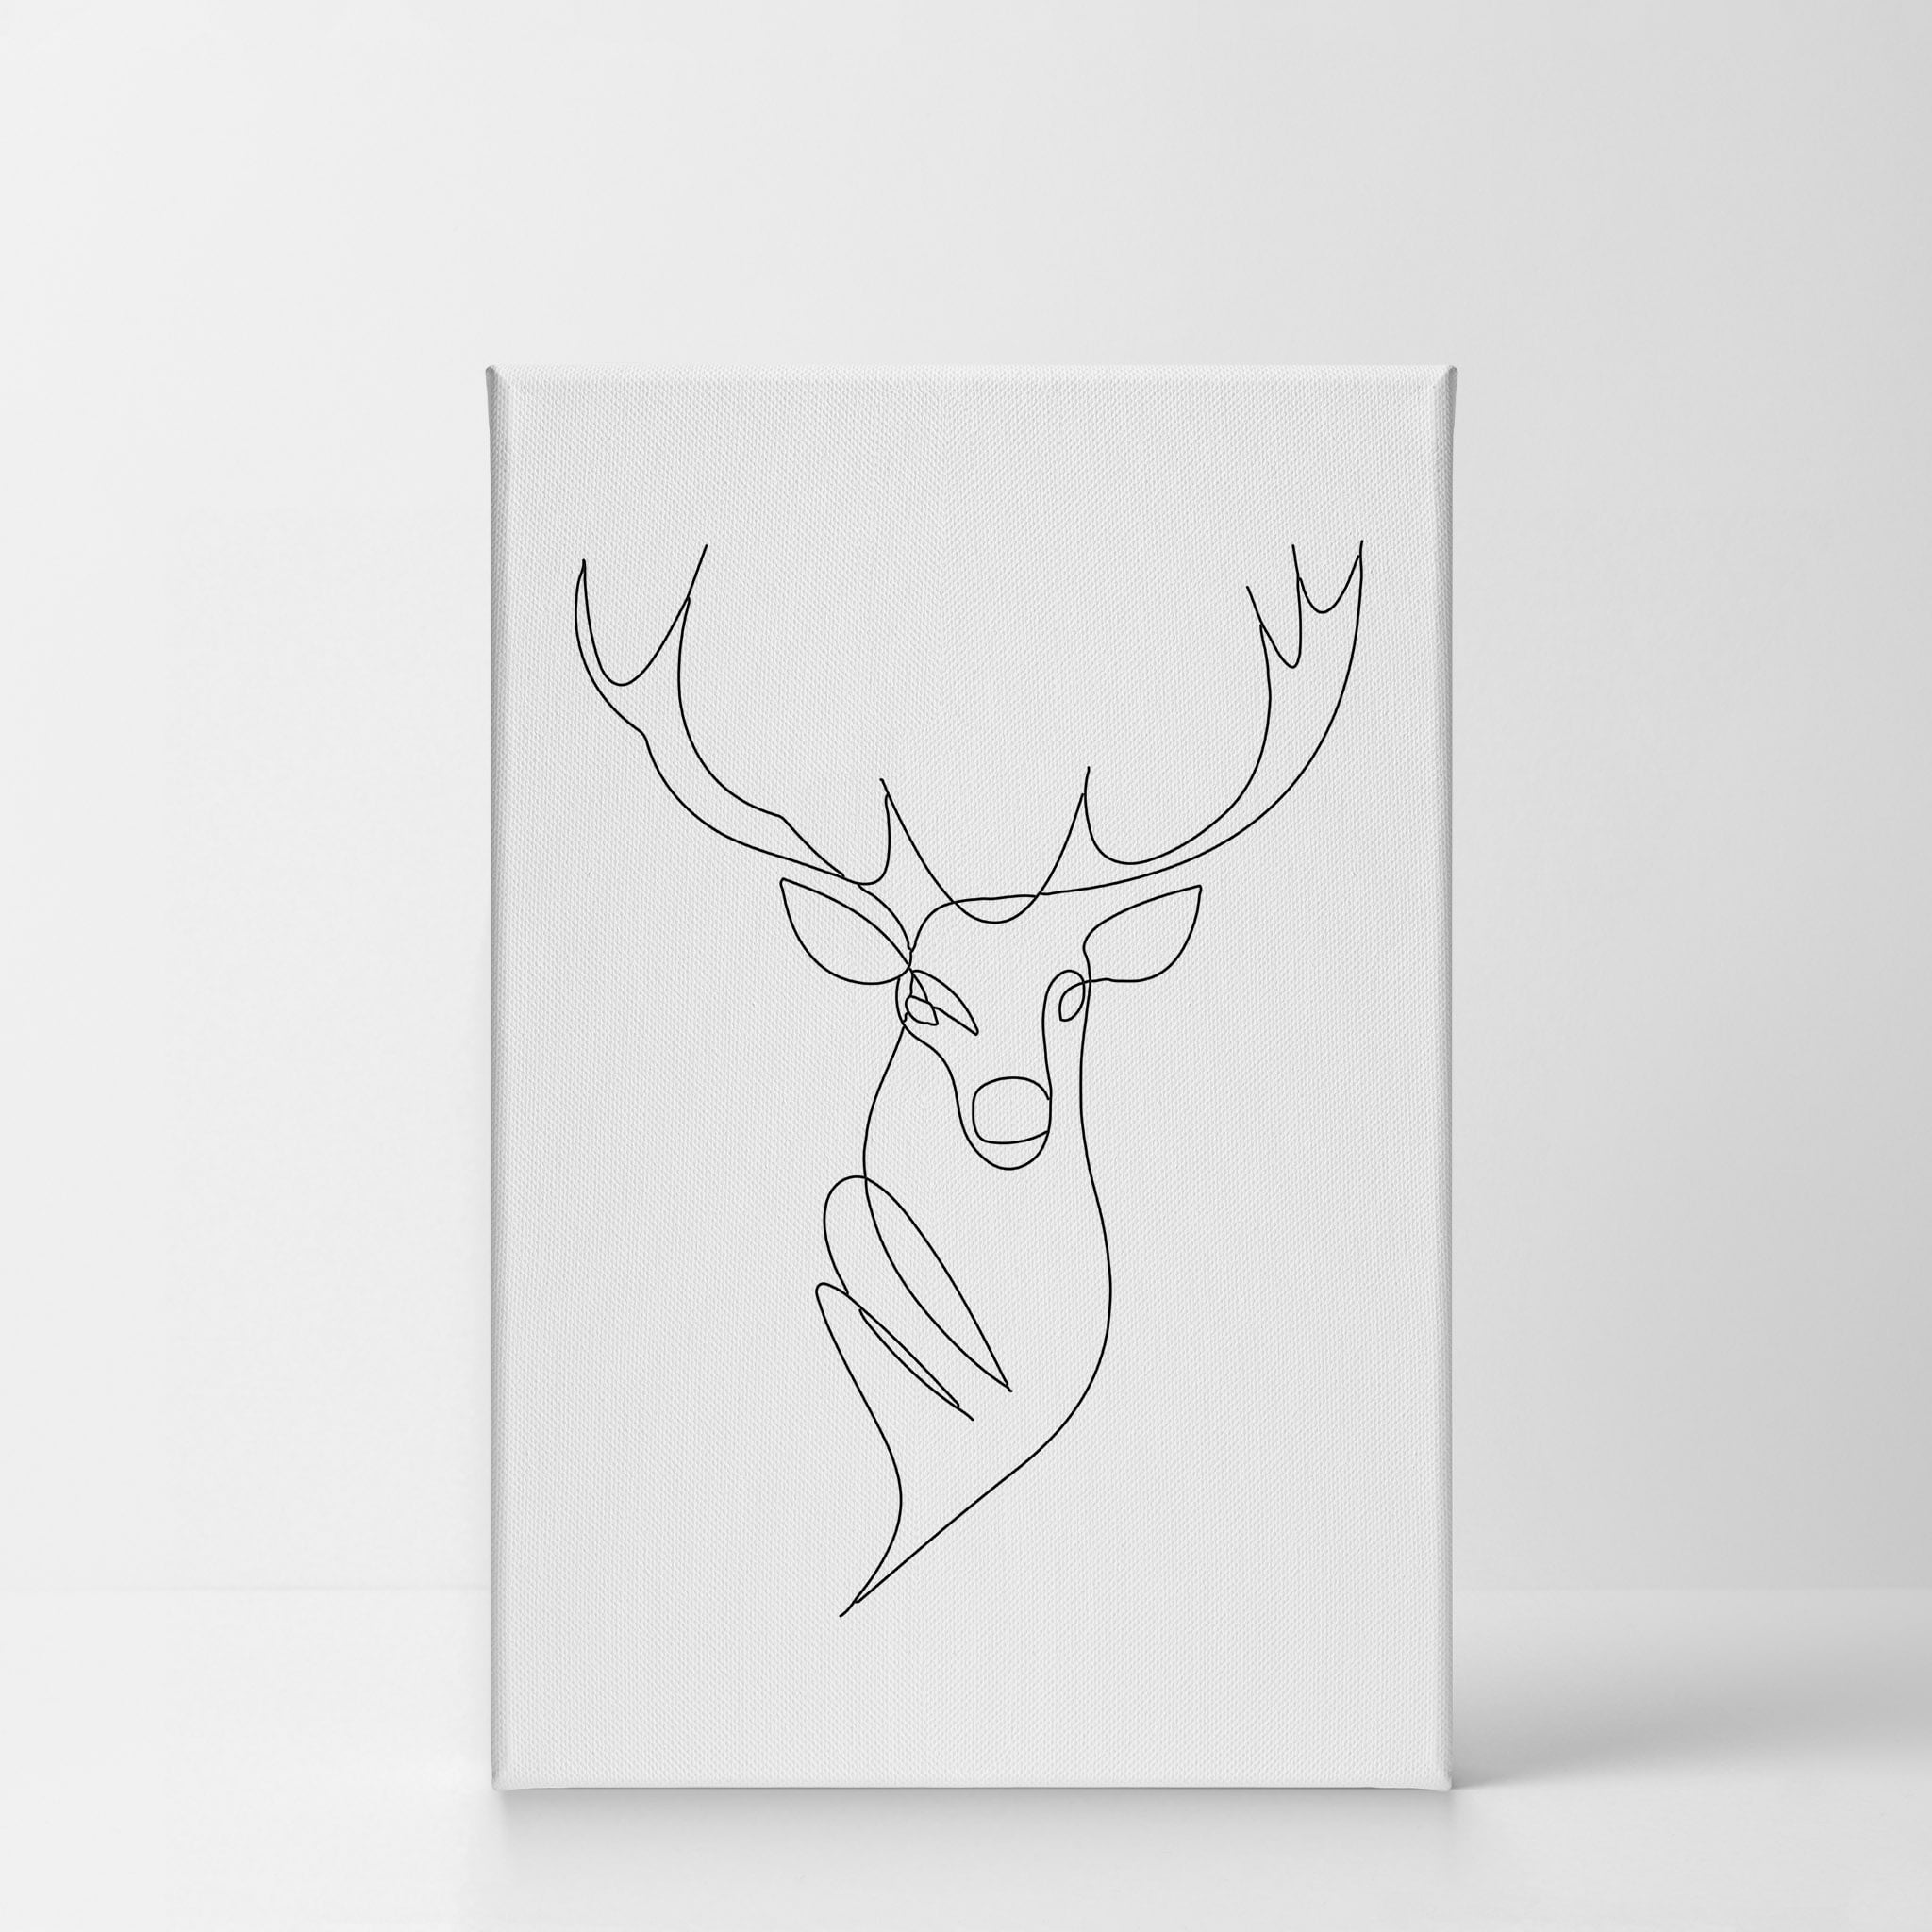 Smile Art Design Black and White One Line Minimalism Art Deer Bust Animal  Abstract Canvas Wall Art Print Office Living Room Dorm Bedroom Aesthetic  Modern Home Decor - 40x30 | Wandtattoos